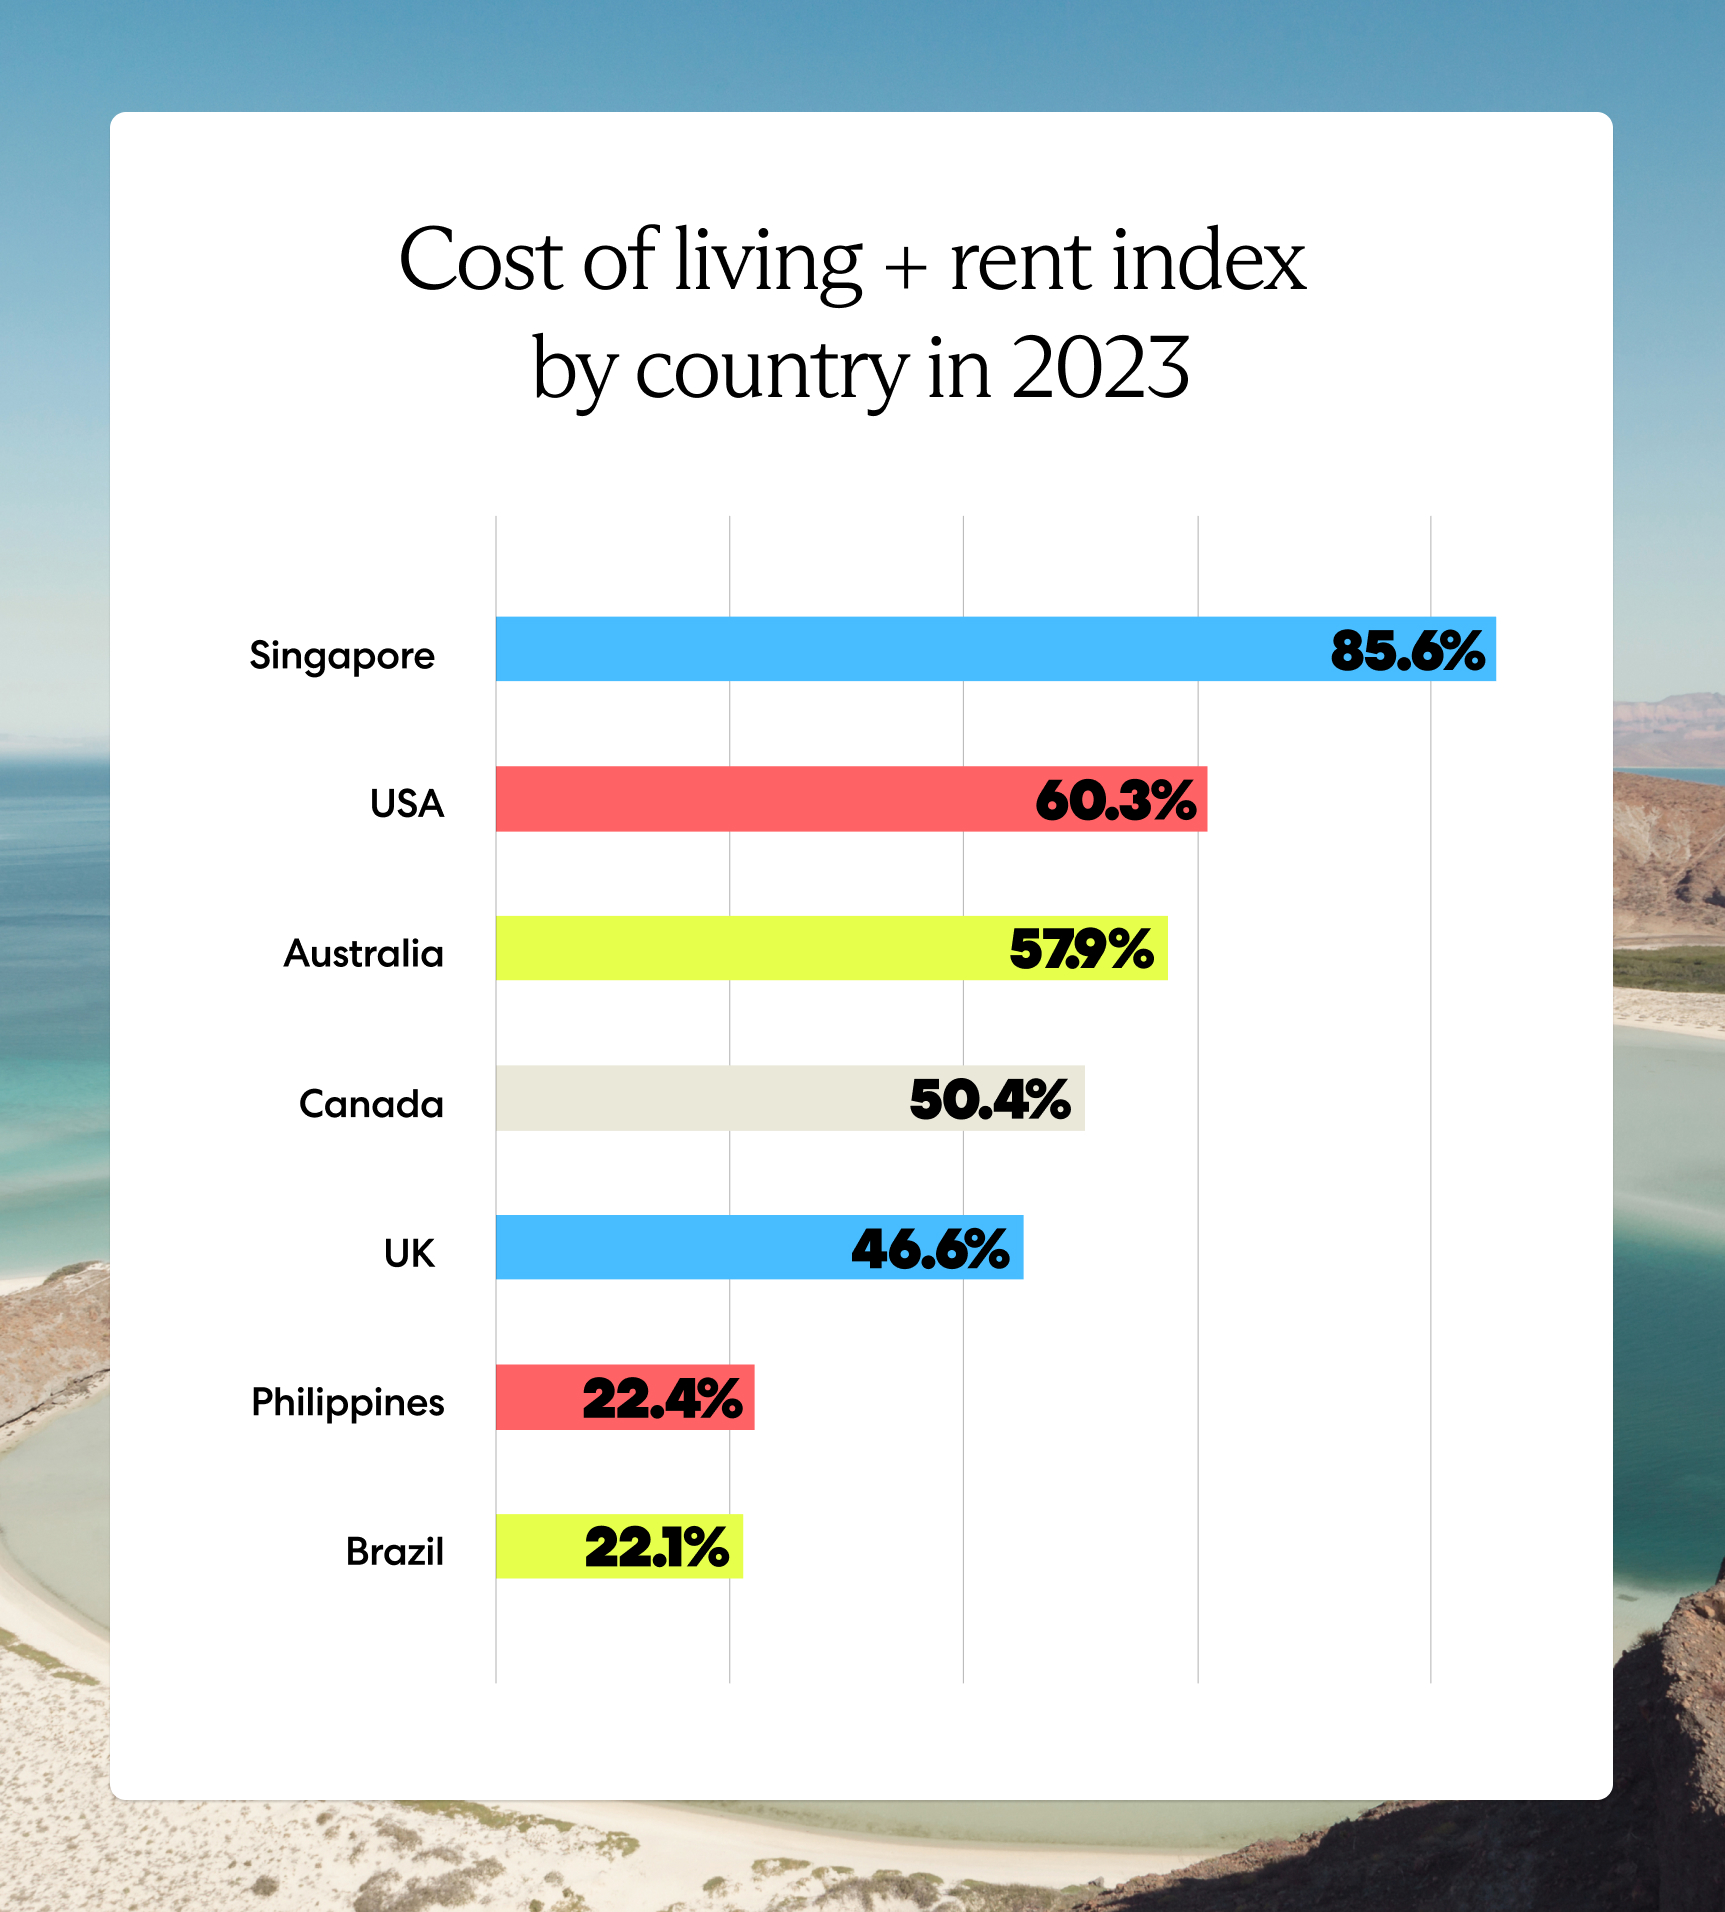 Chart comparing 2023 cost of living plus rent index in various countries.